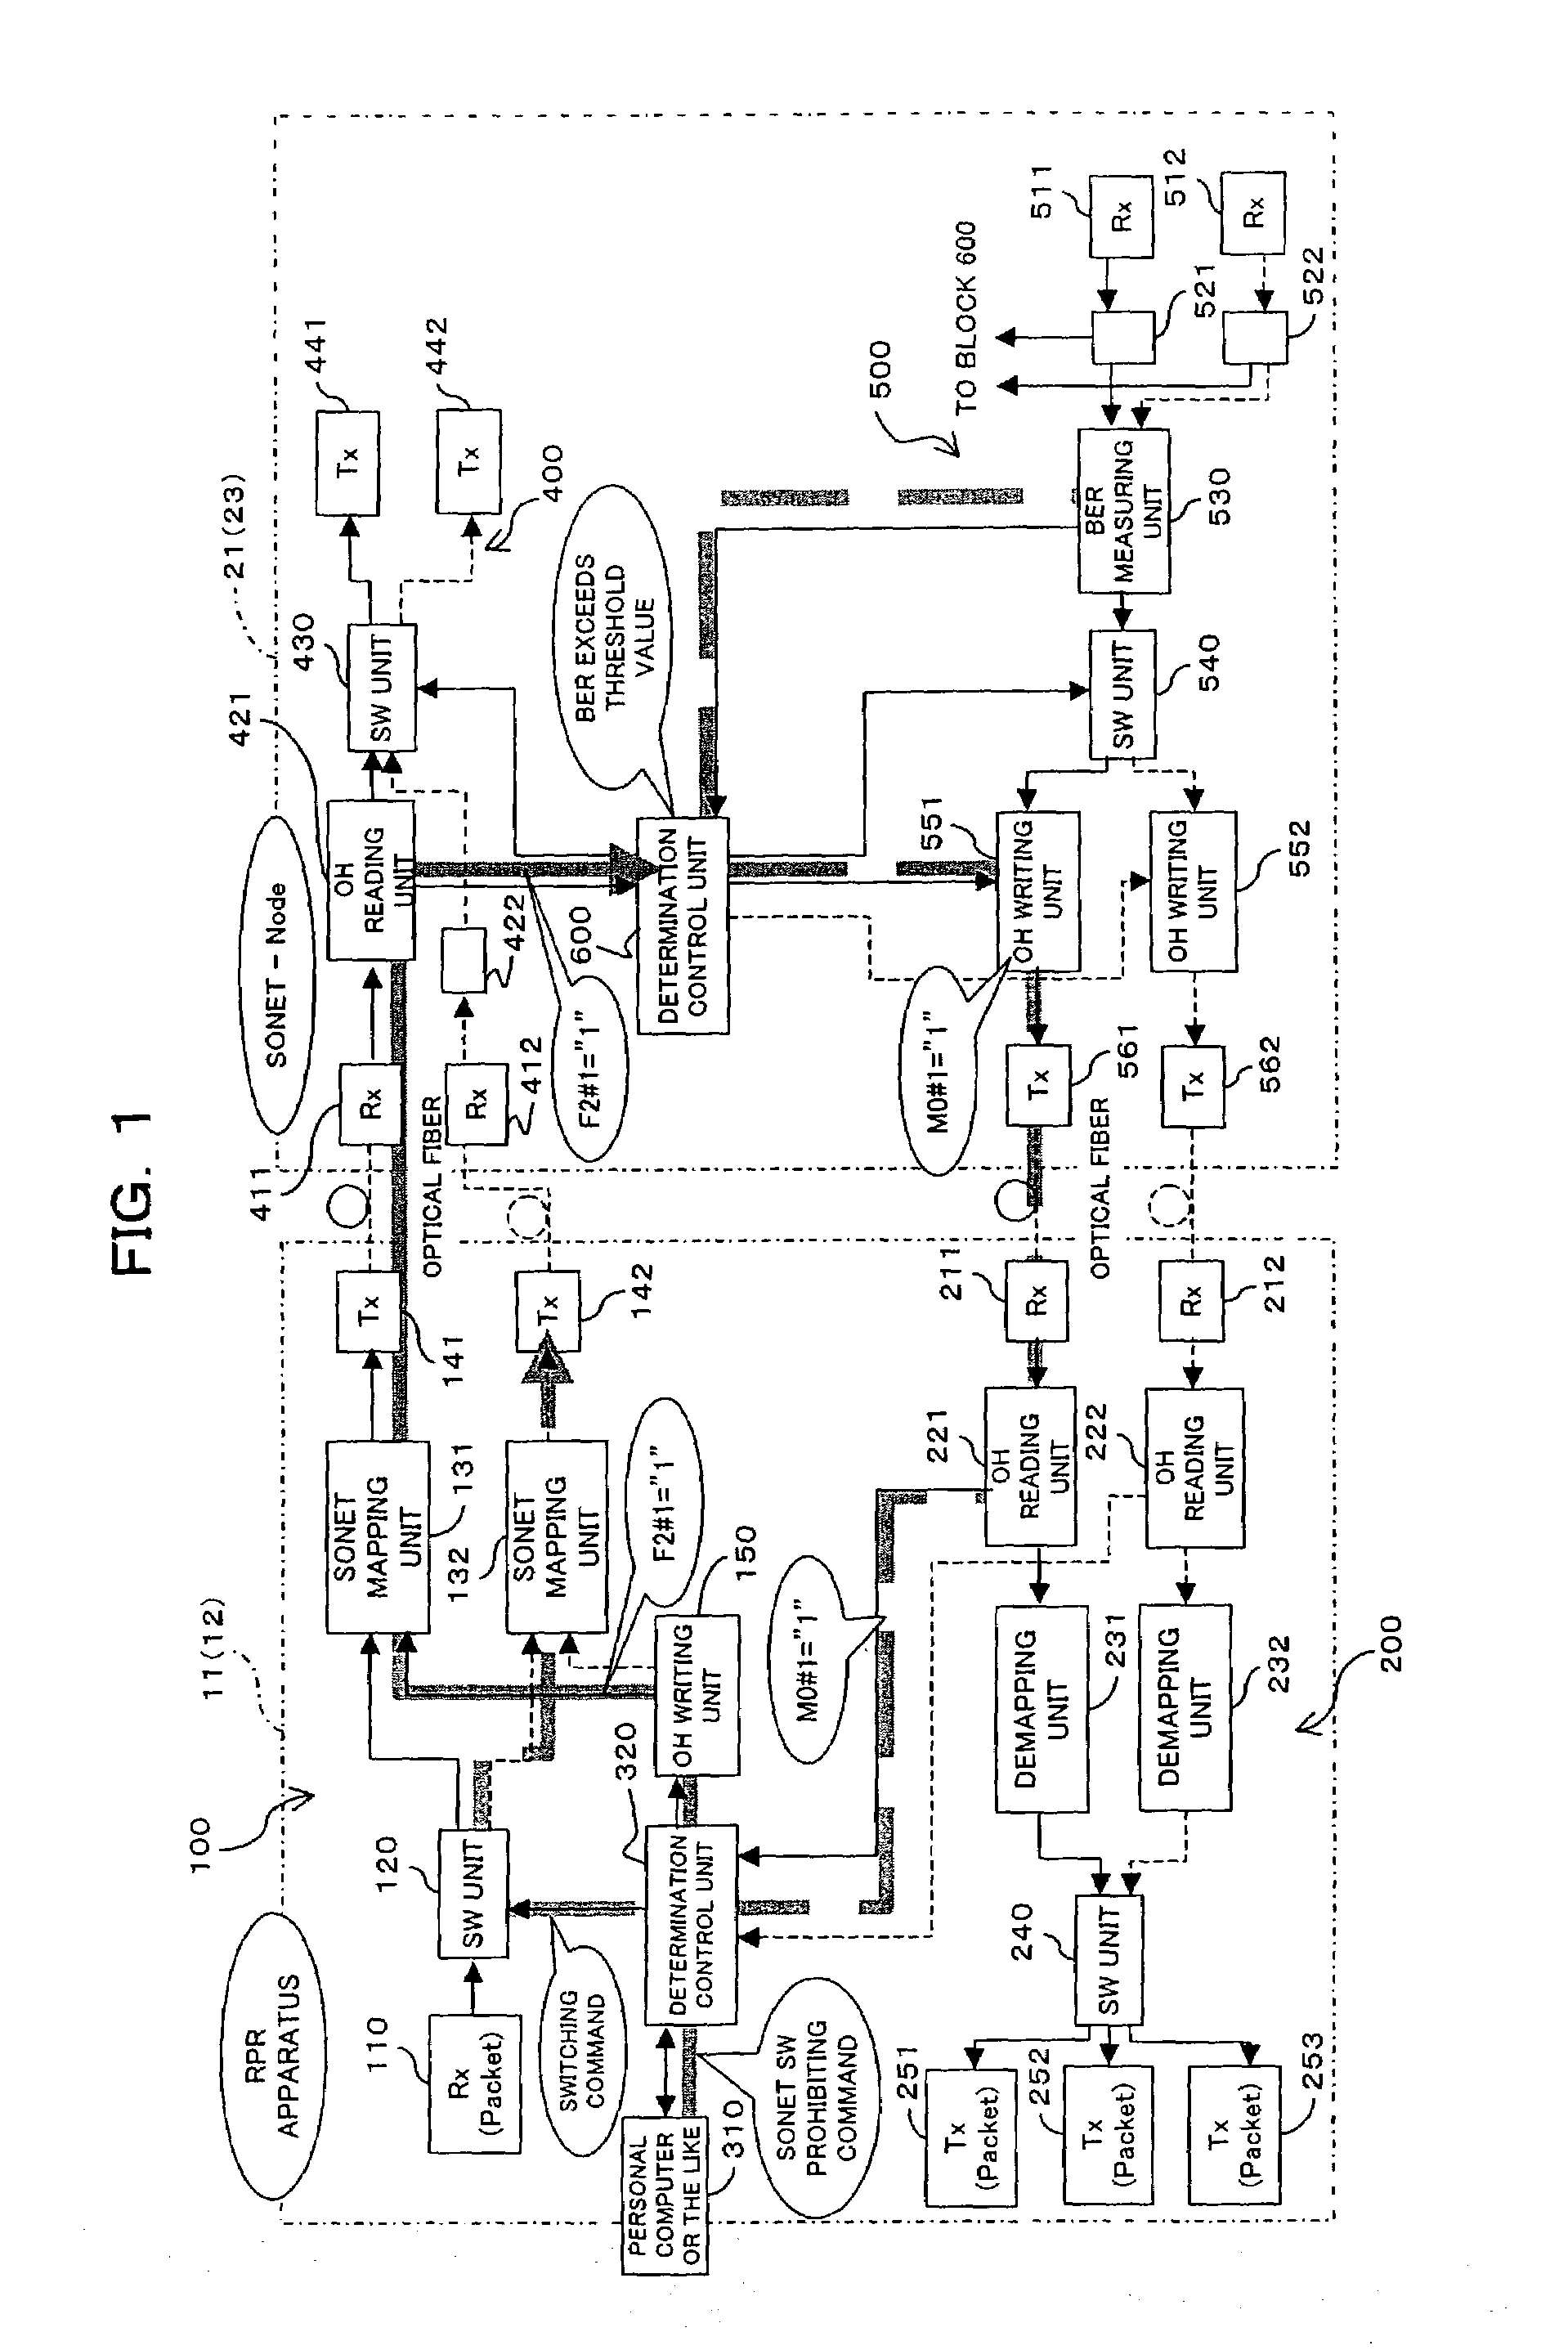 Method of effecting protection control in communication network and RPR apparatus